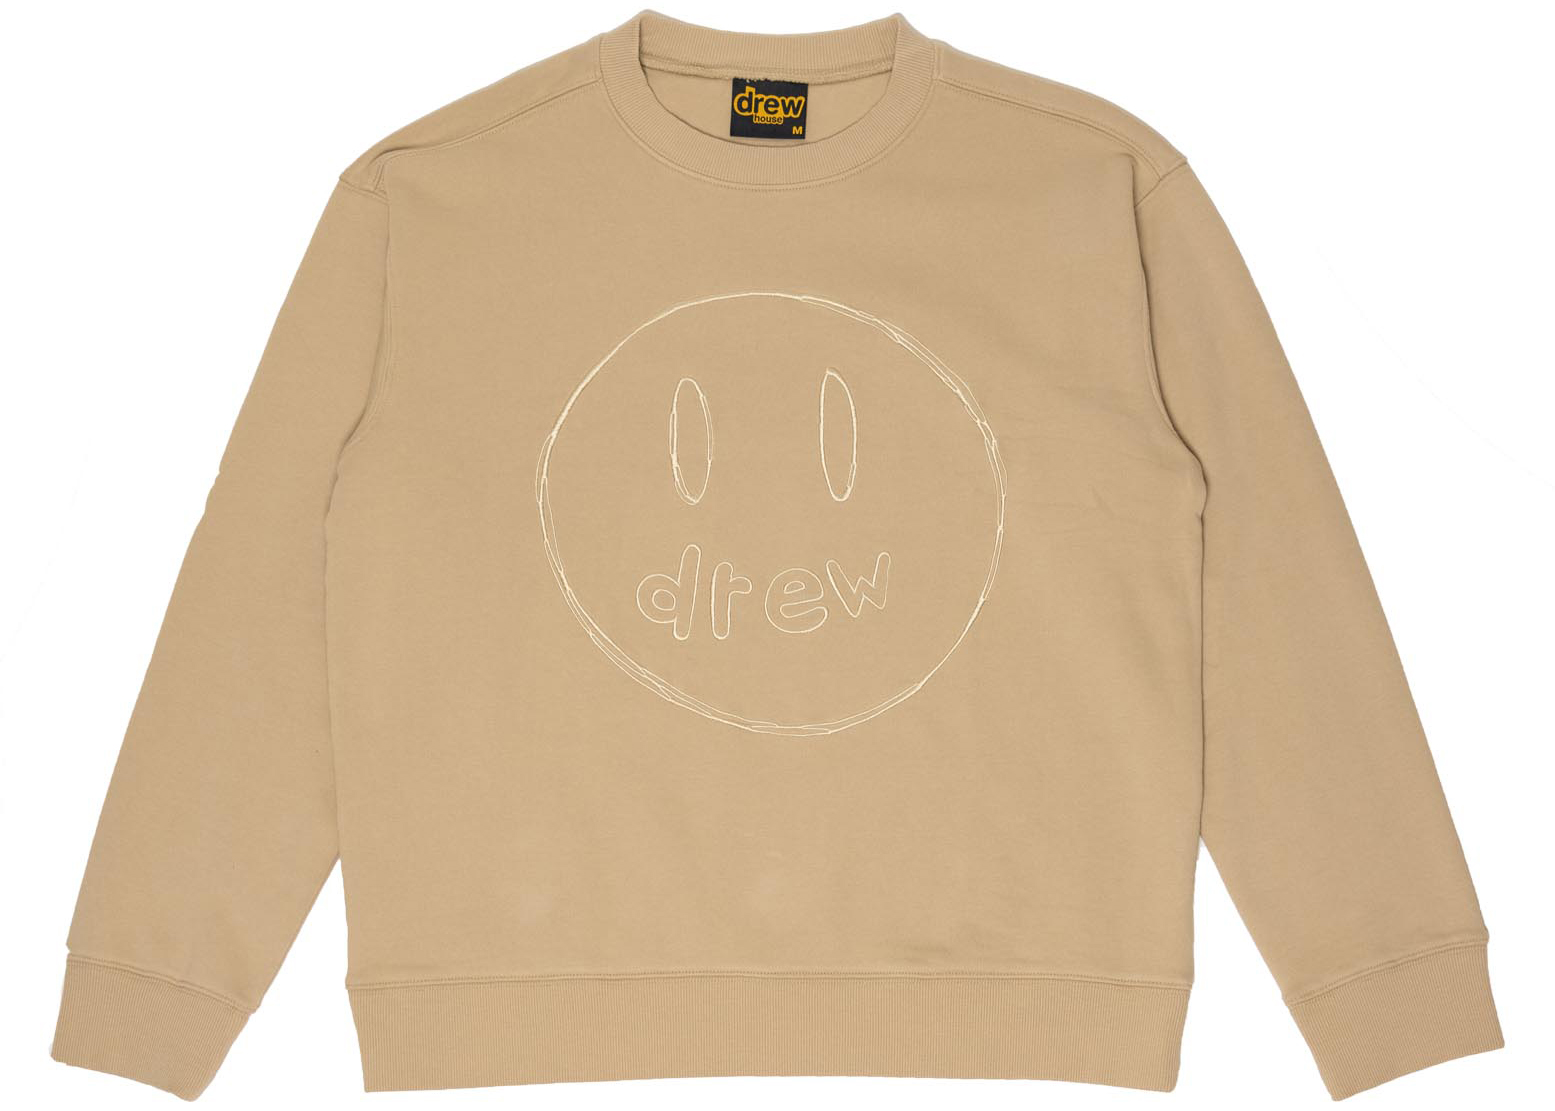 drew house sketch mascot sweater - whirledpies.com